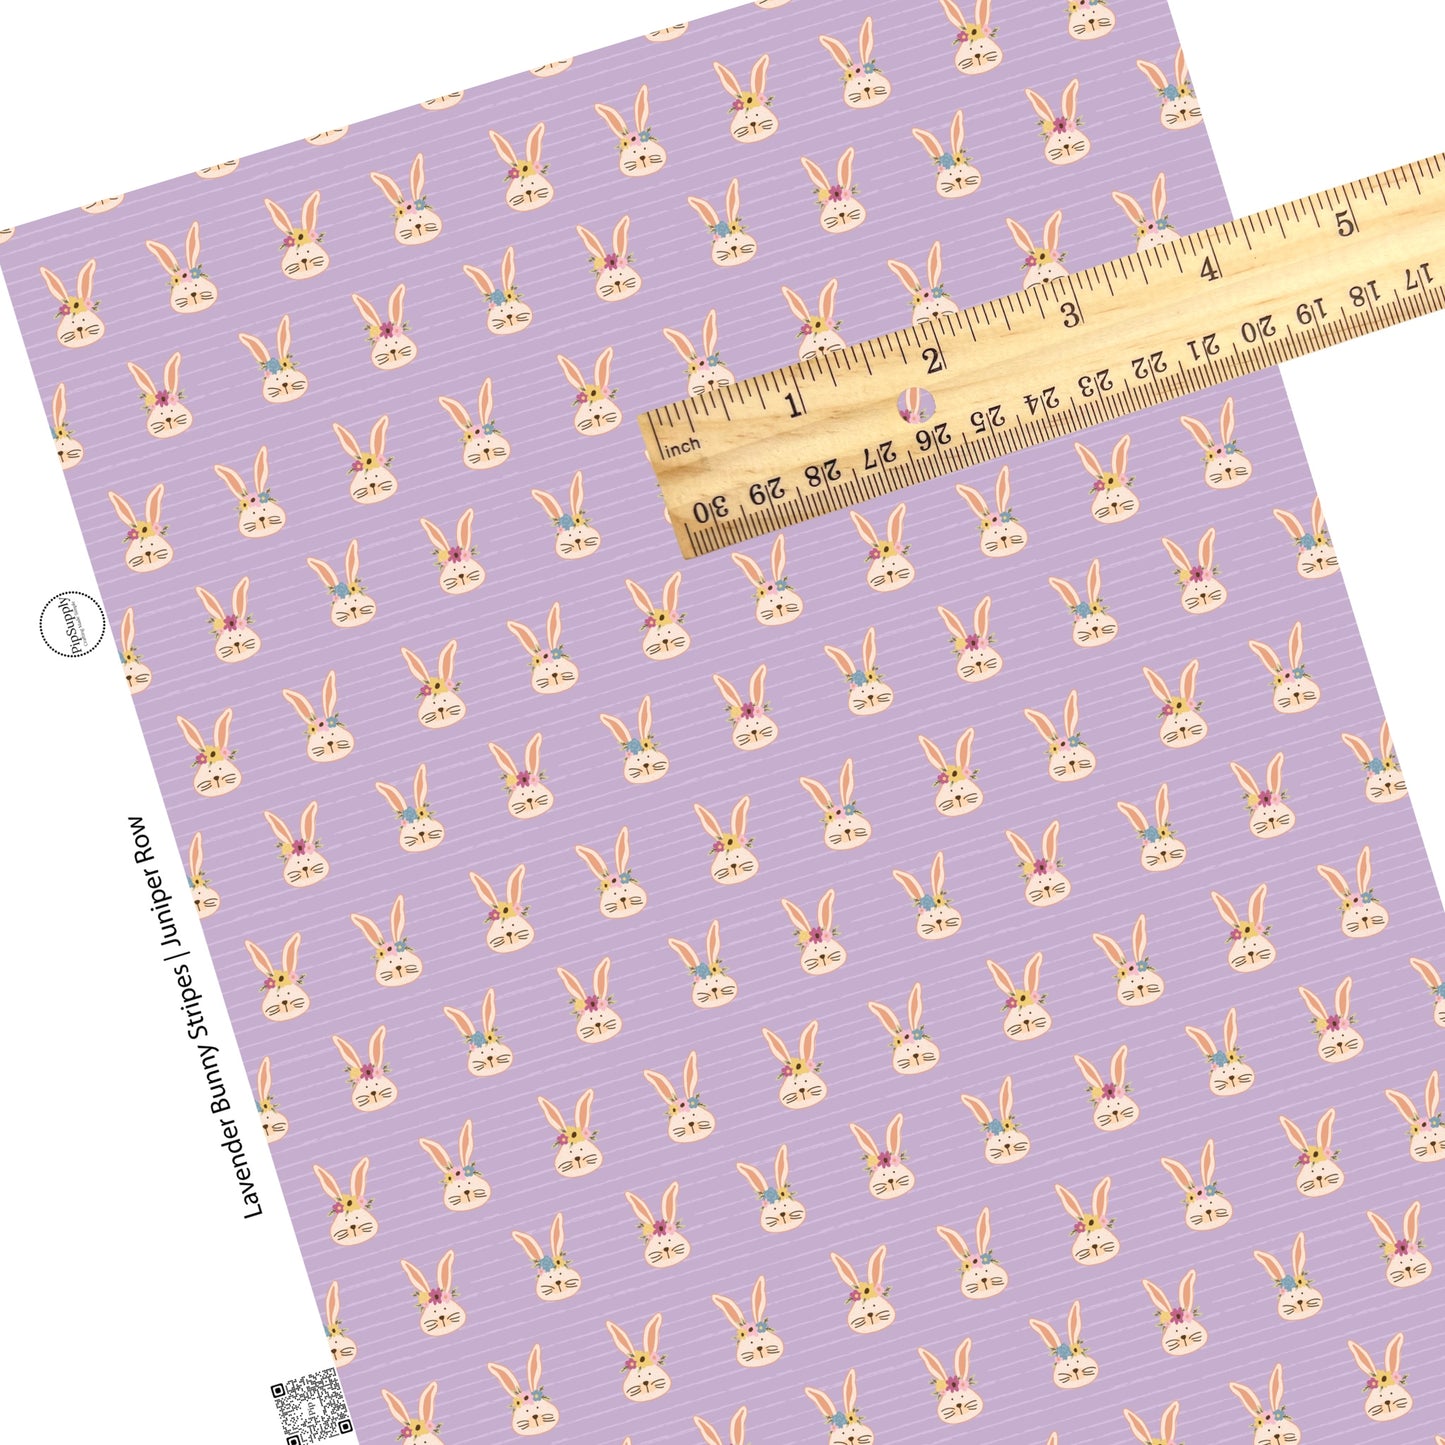 ;avender stripes with brown bunnies wearing floral crowns on lavender faux leather sheets